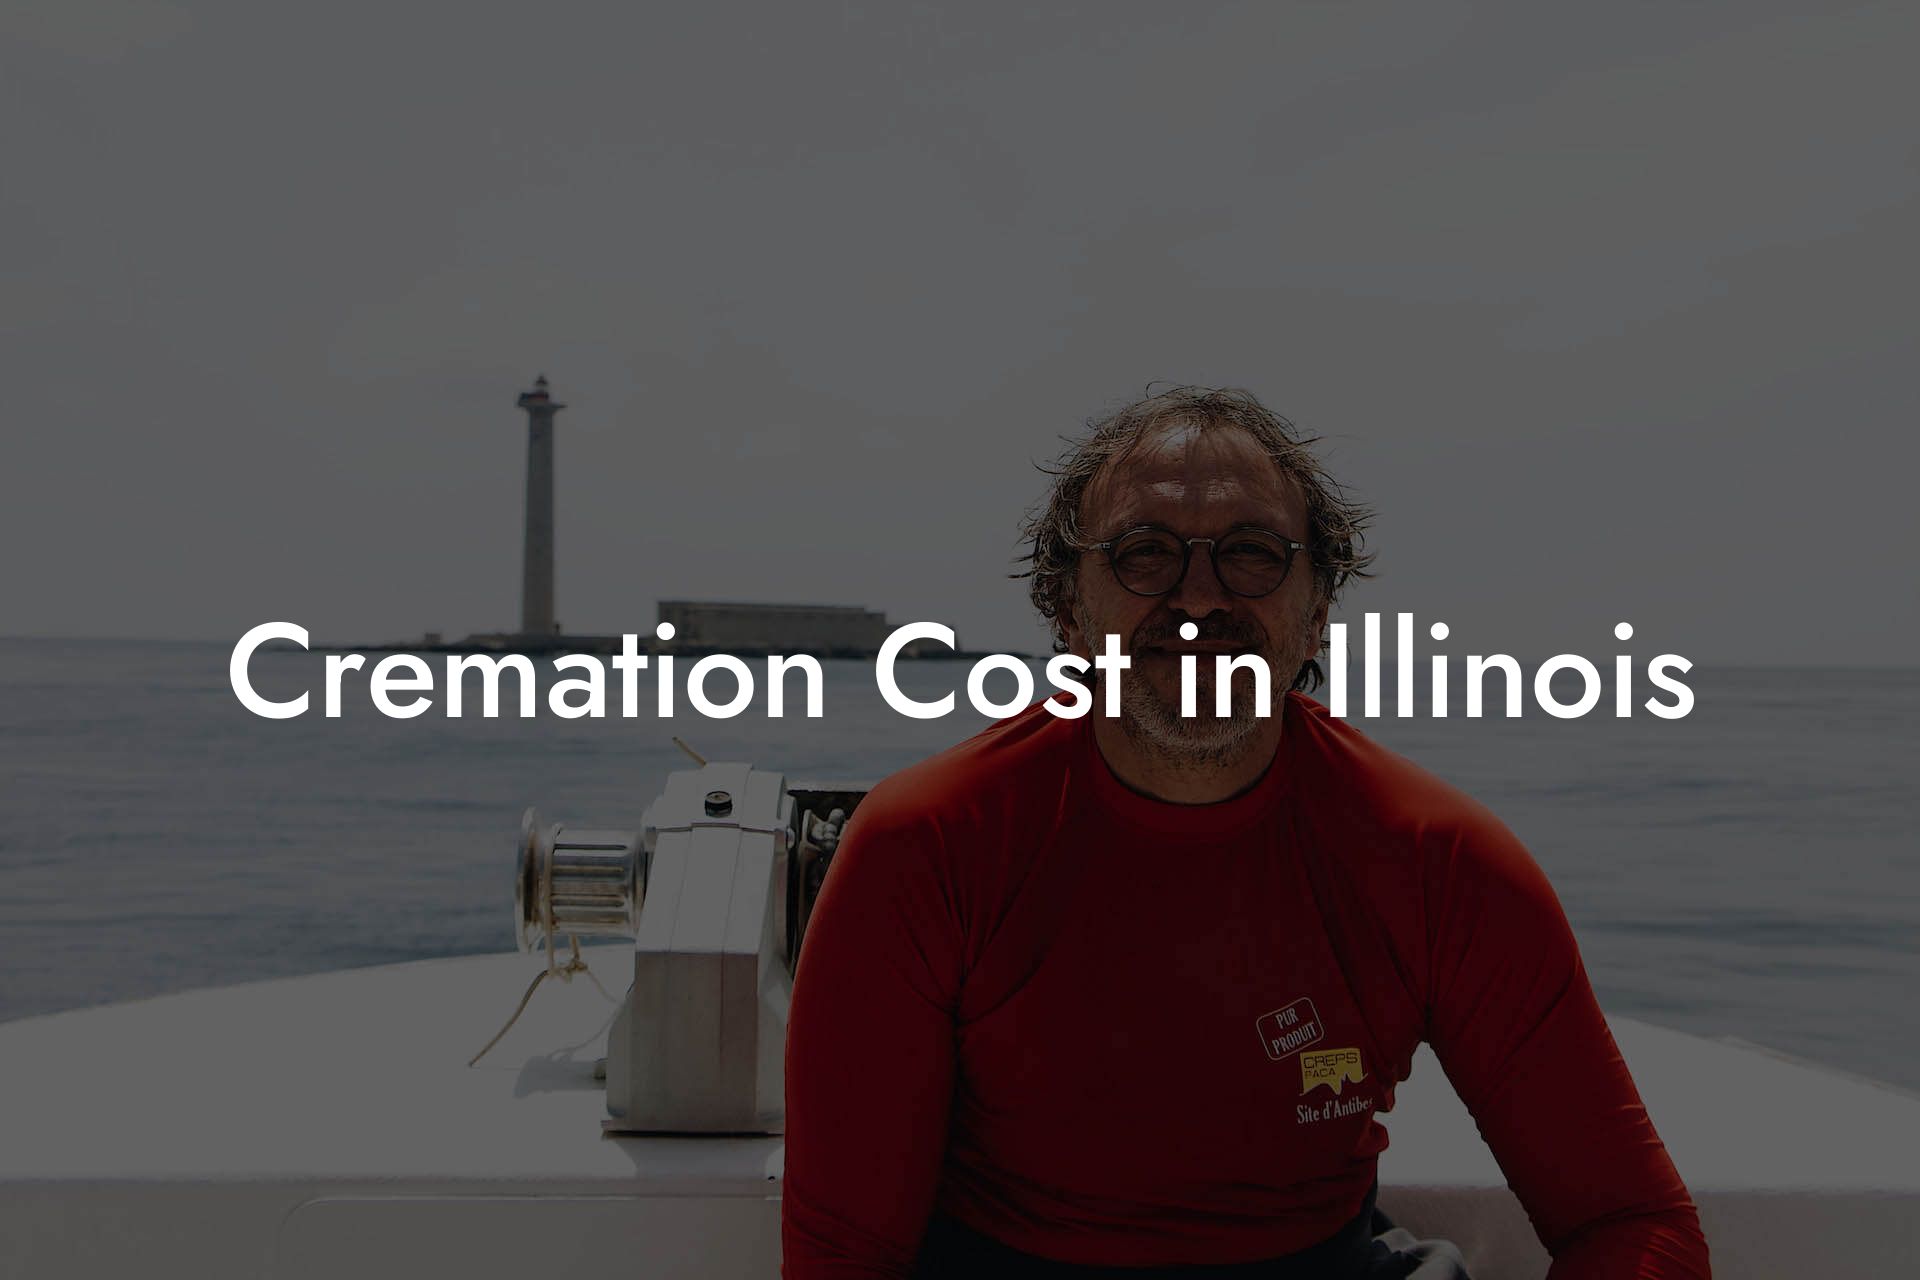 Cremation Cost in Illinois